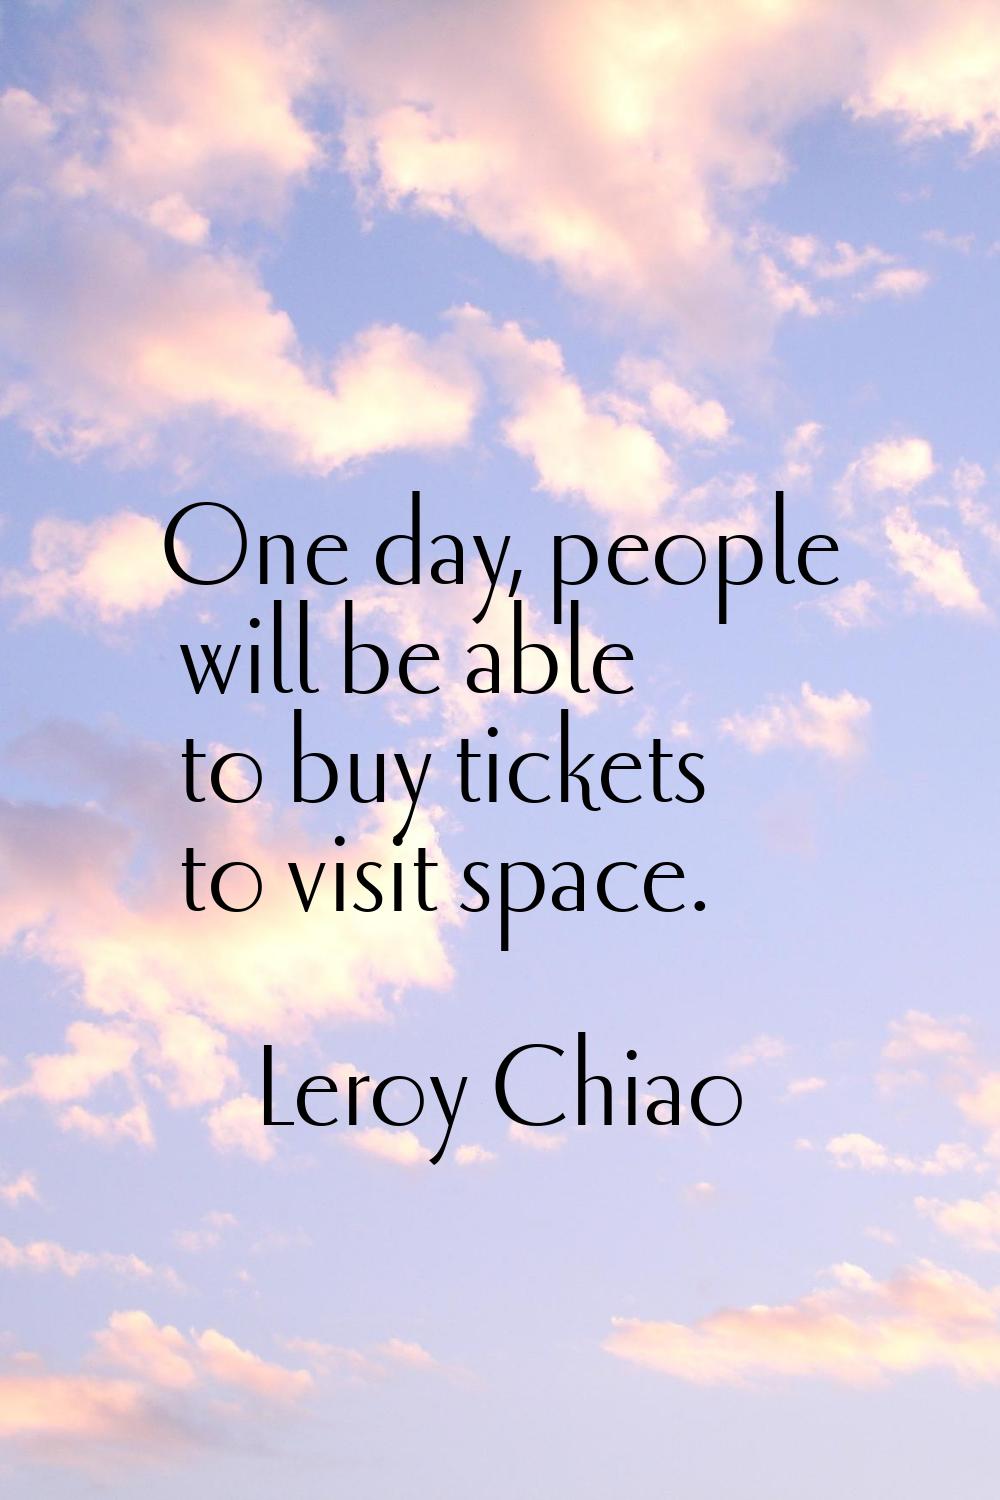 One day, people will be able to buy tickets to visit space.